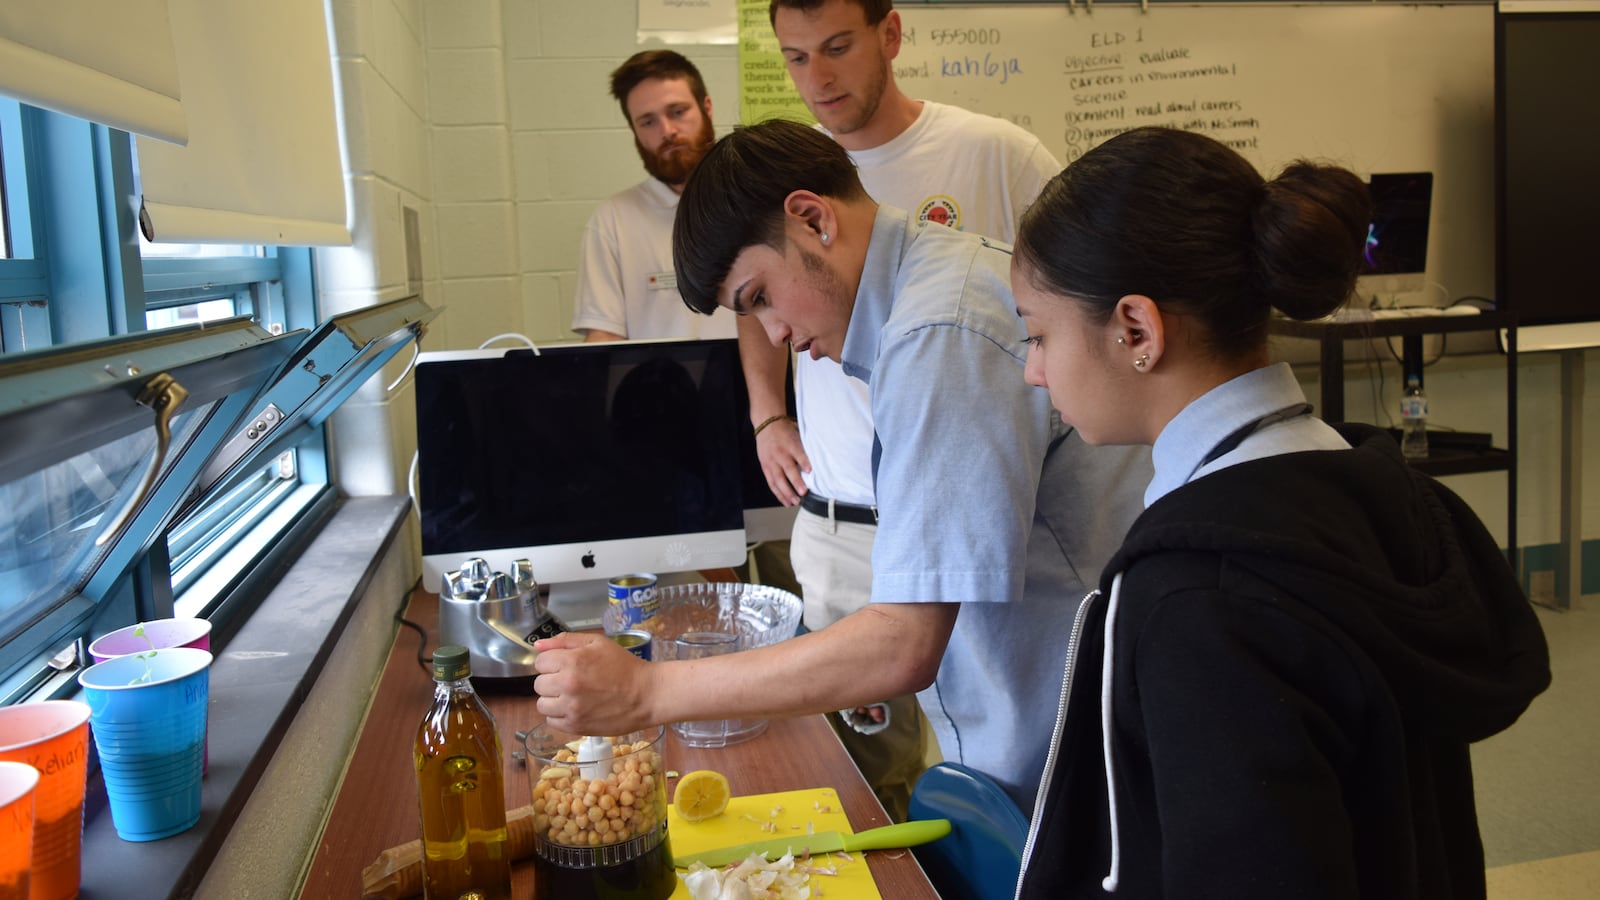 Students at Kensington Health Sciences Academy can participate in cooking clubs designed to teach about healthy, easy-to-make meals.